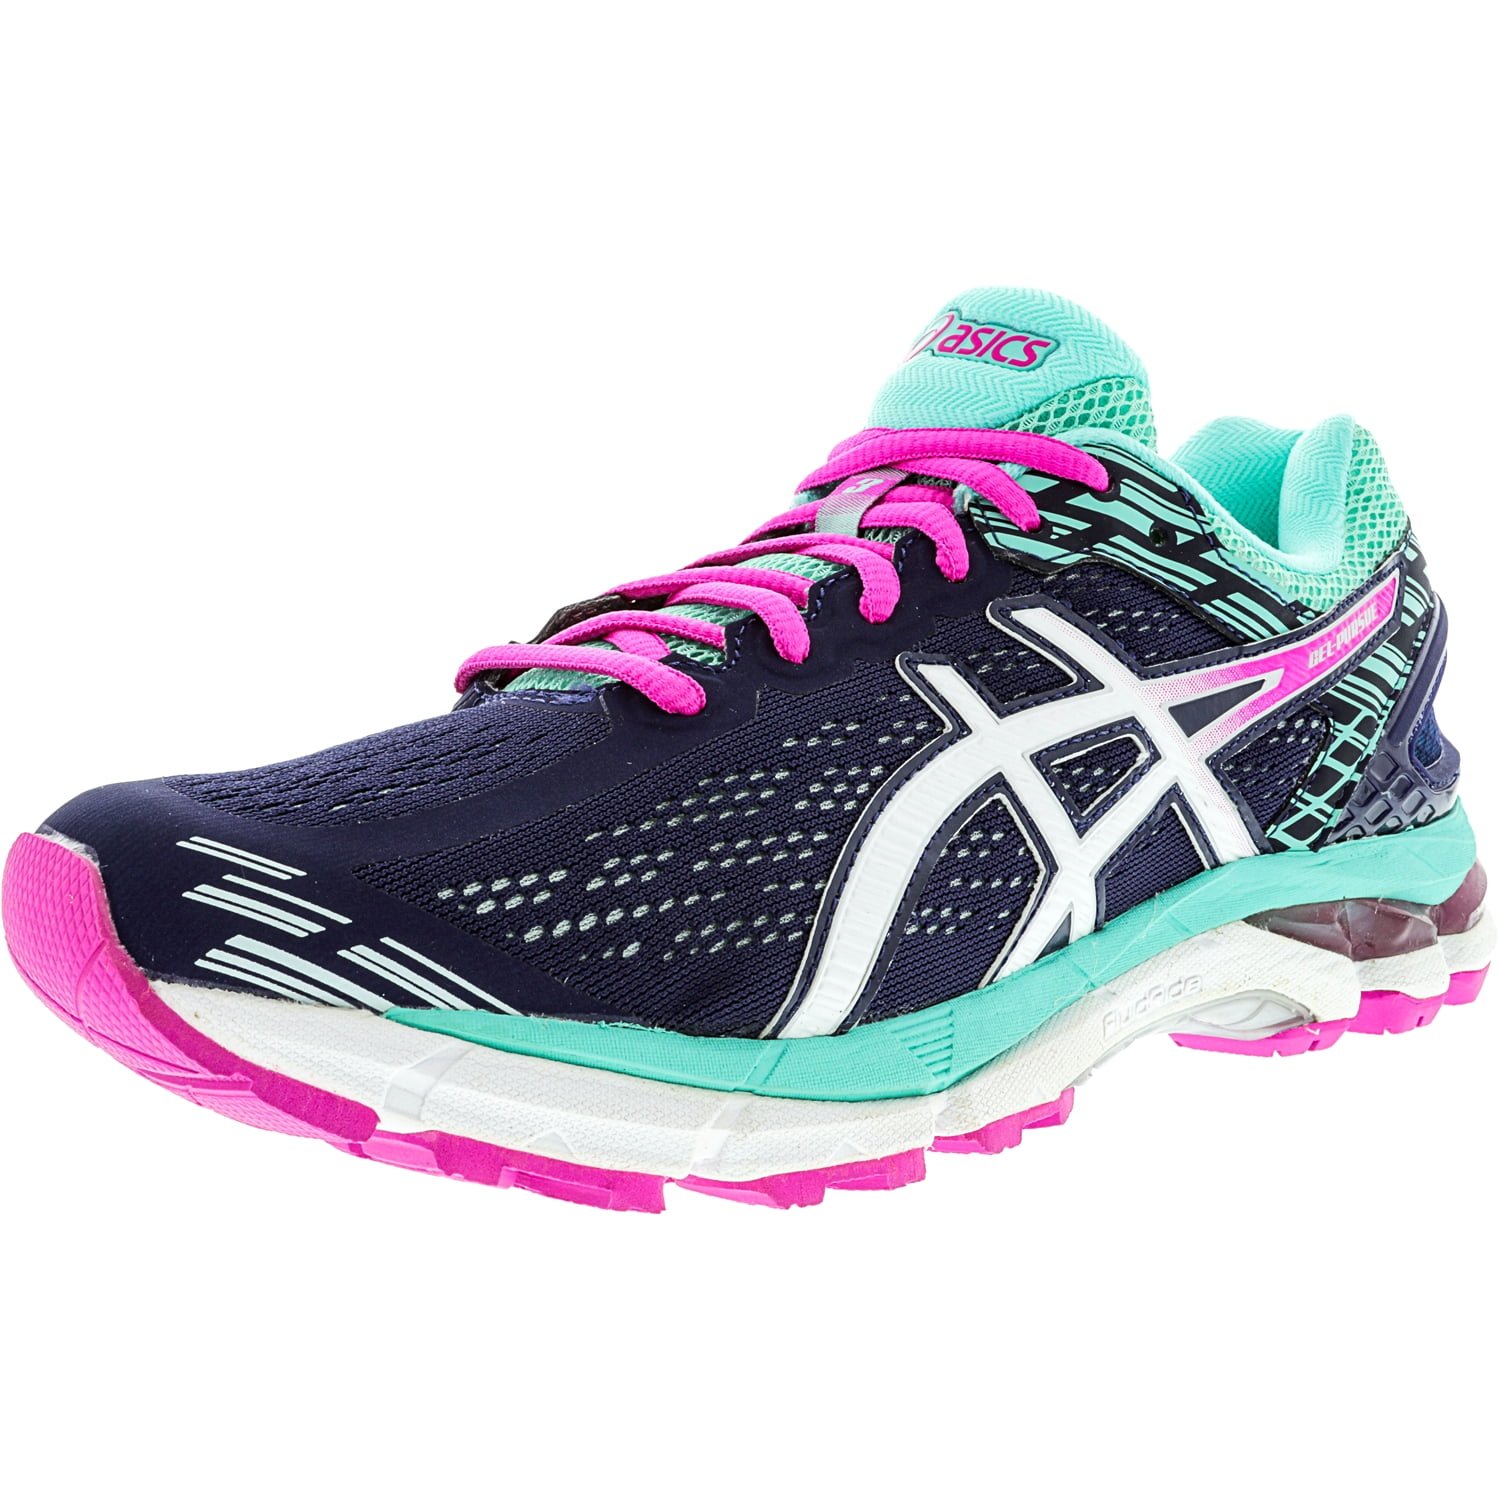 White Pink Glow Ankle-High Running Shoe 